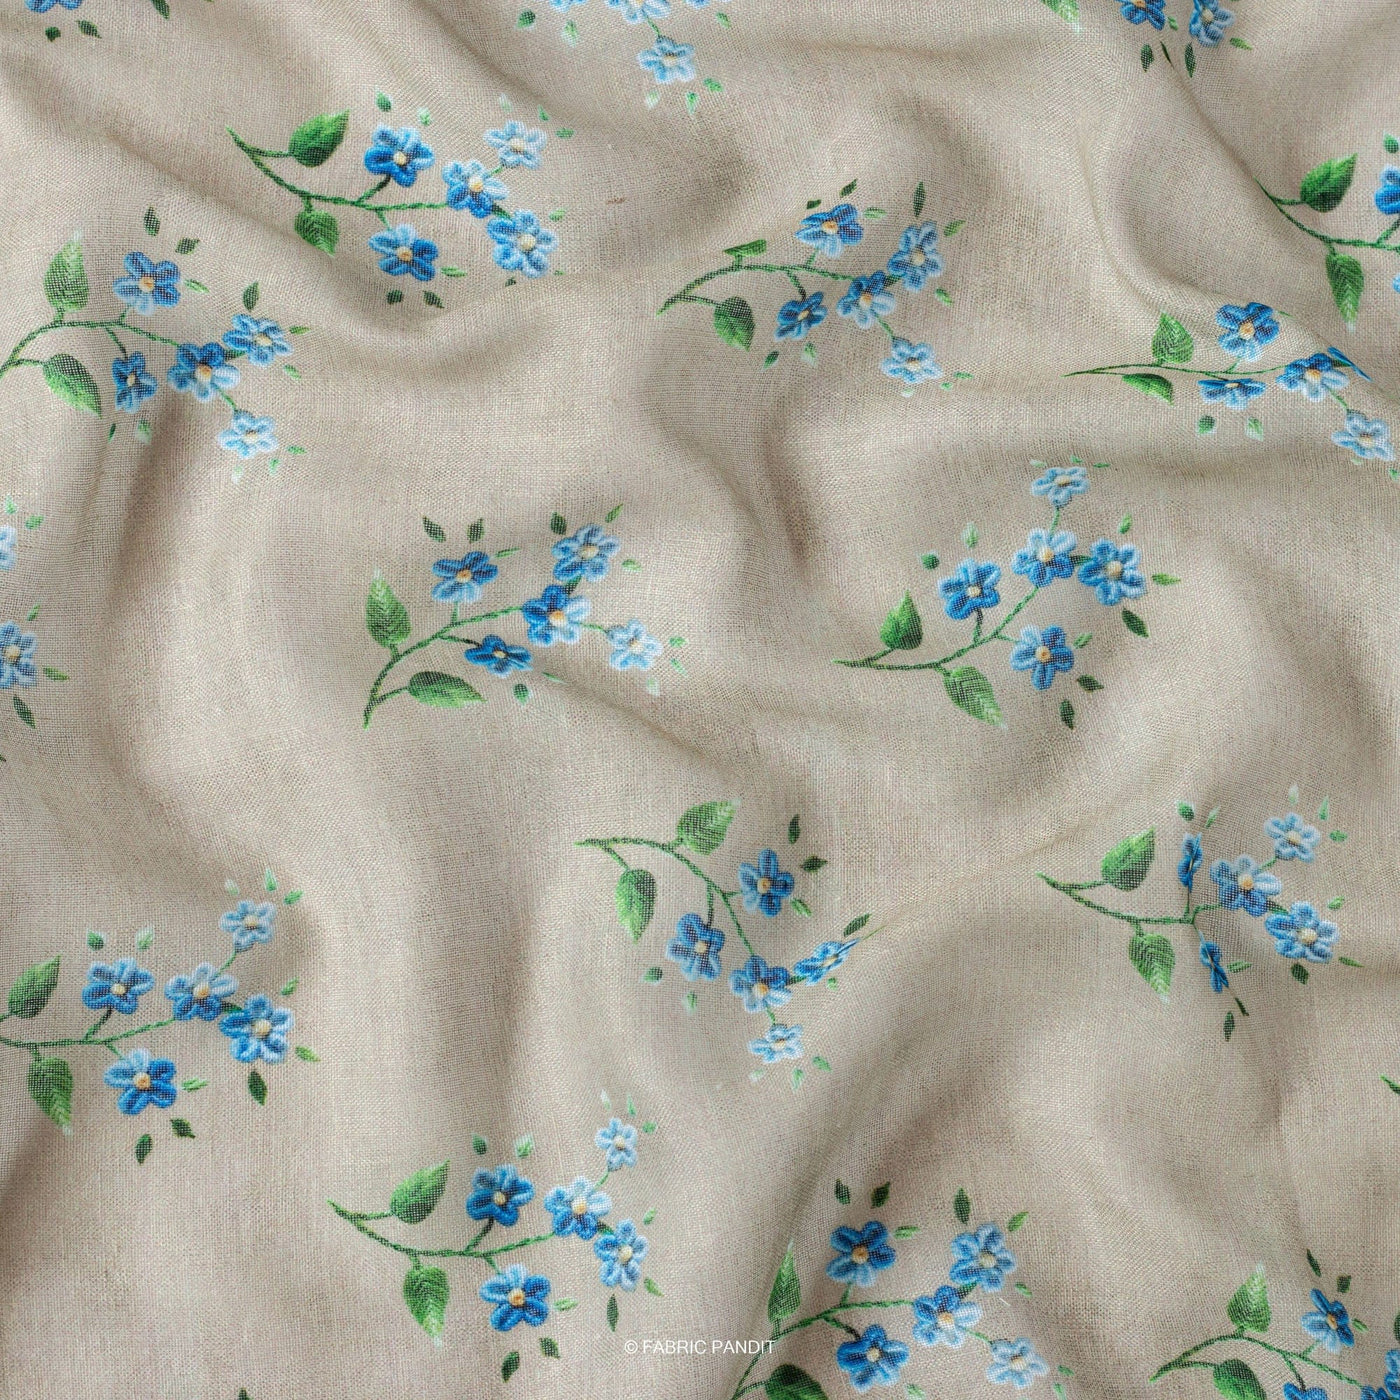 Fabric Pandit Fabric Khaki and Blue Flower Bunch Digital Printed Poly Blend Linen Neps Fabric (Width 44 Inches)